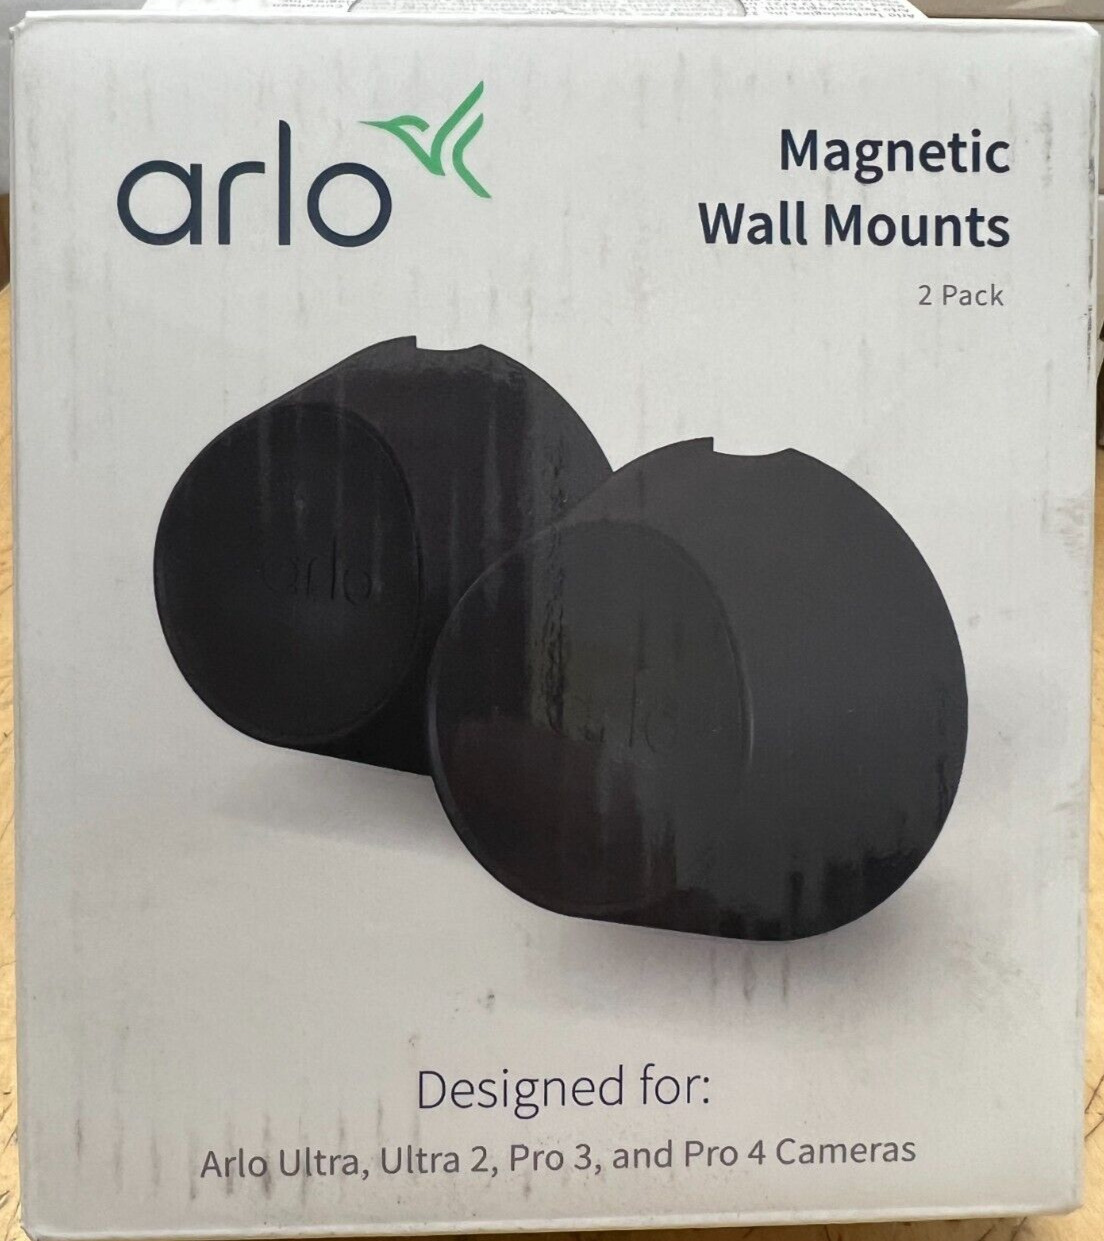 2 Pack Arlo Magnetic Wall Mounts For Arlo Ultra, Ultra 2, Pro 3/4 VMA5001-10000S